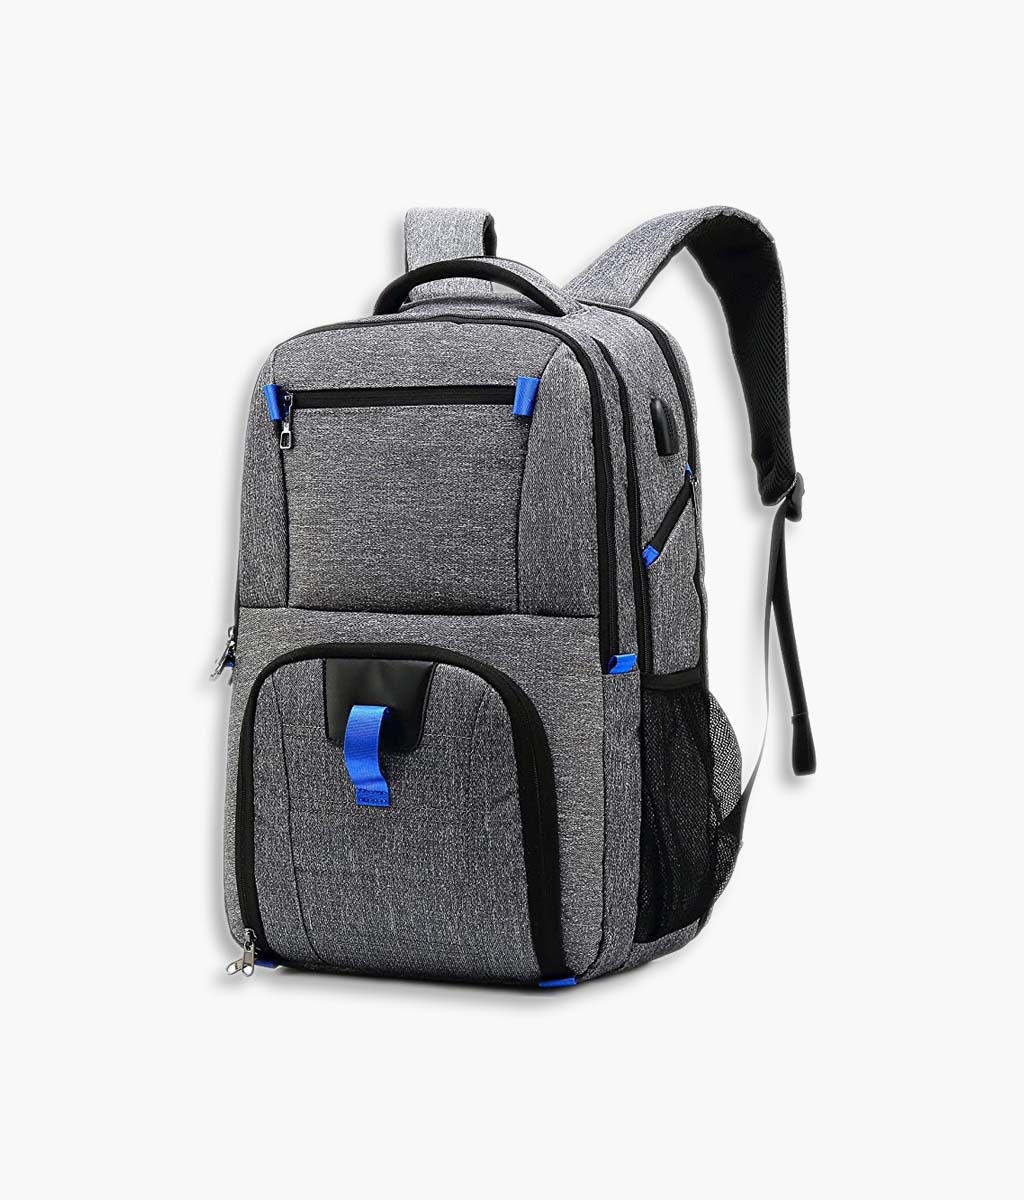 Laptop Backpack for Business Travel Featured Image